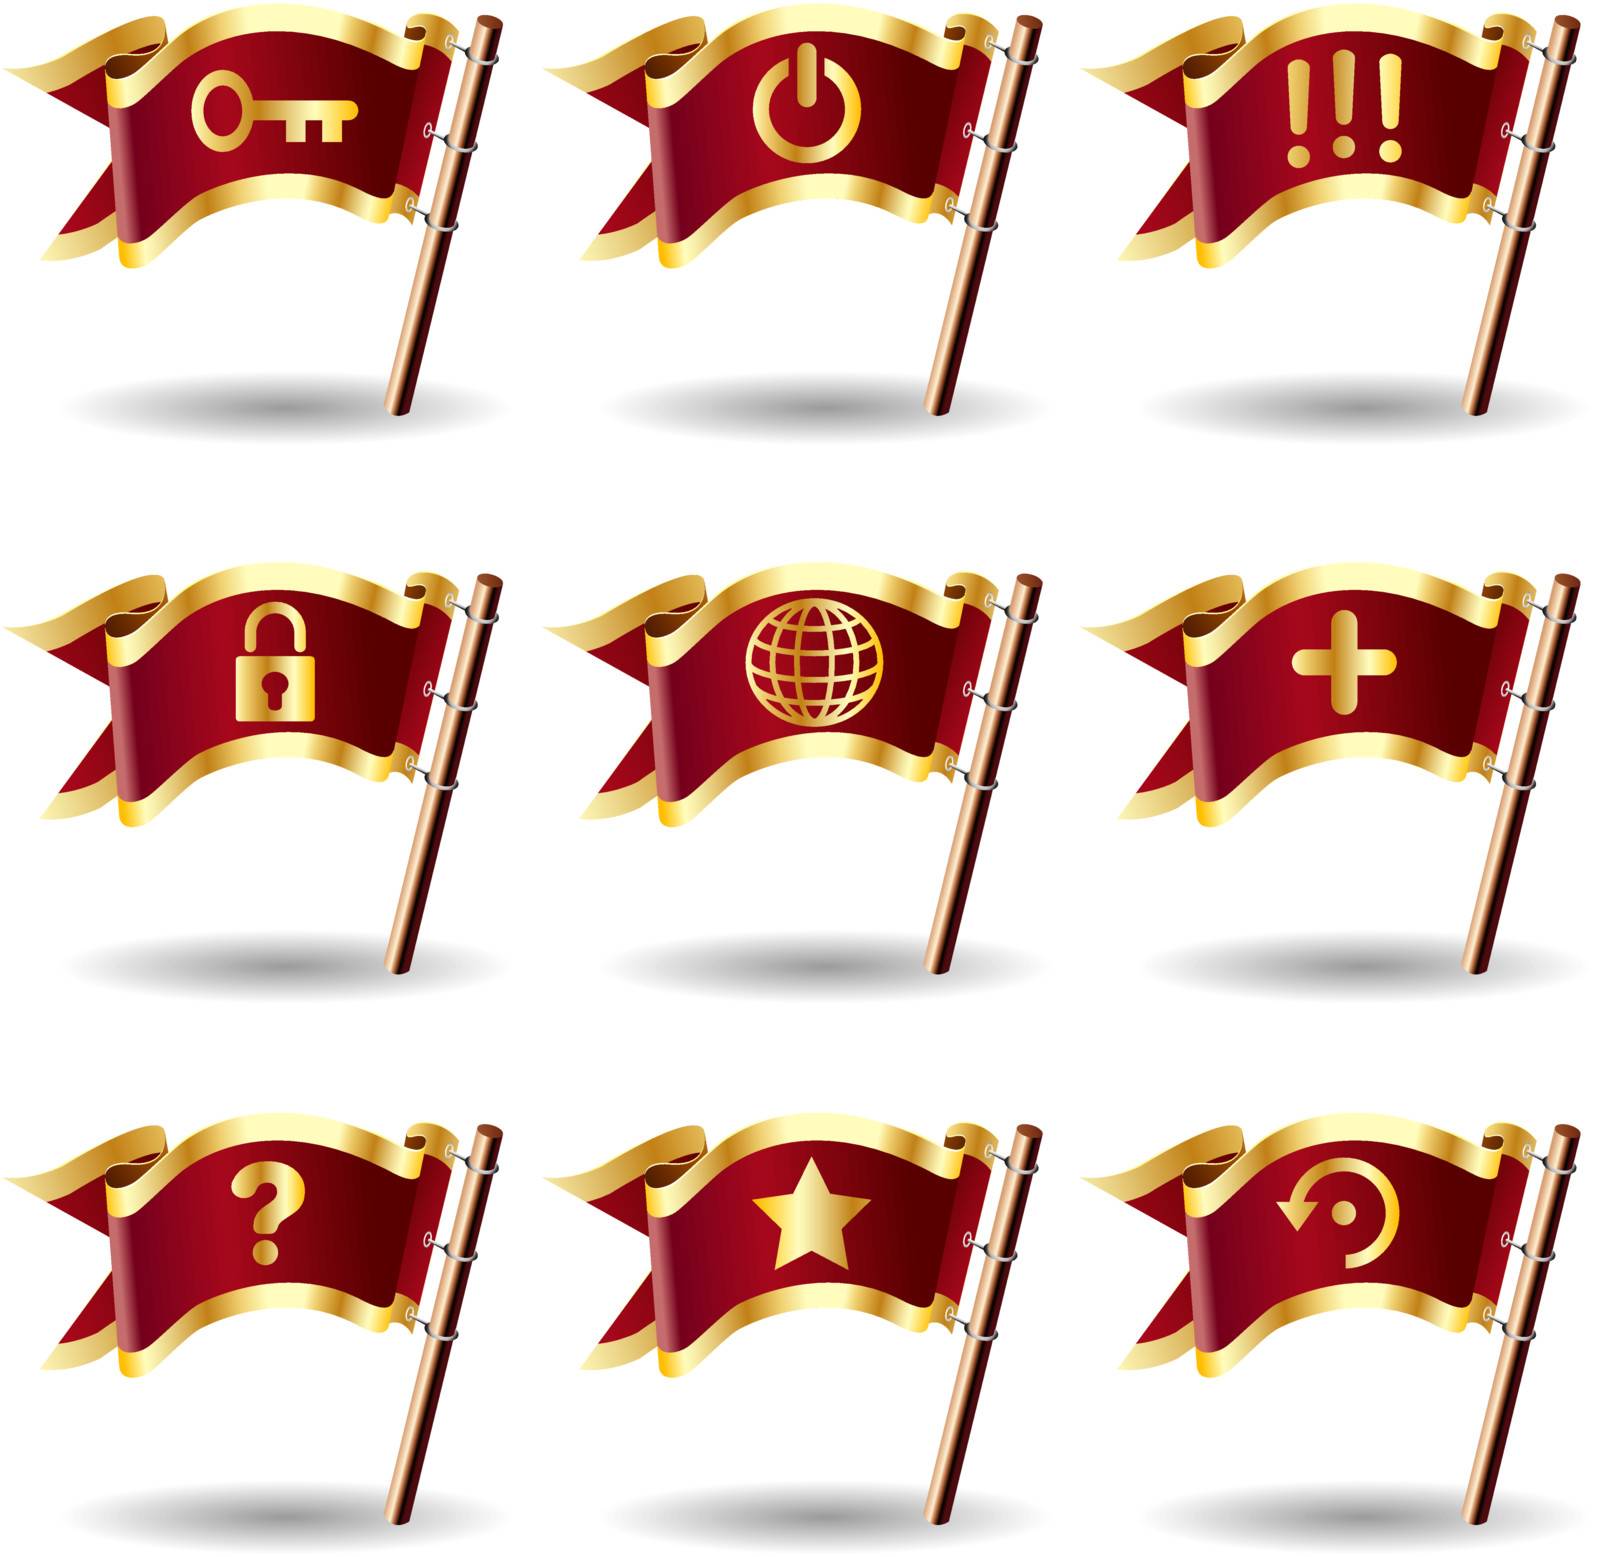 Desktop application computer icons on royal vector flag buttons - good for print, web, or packaging

